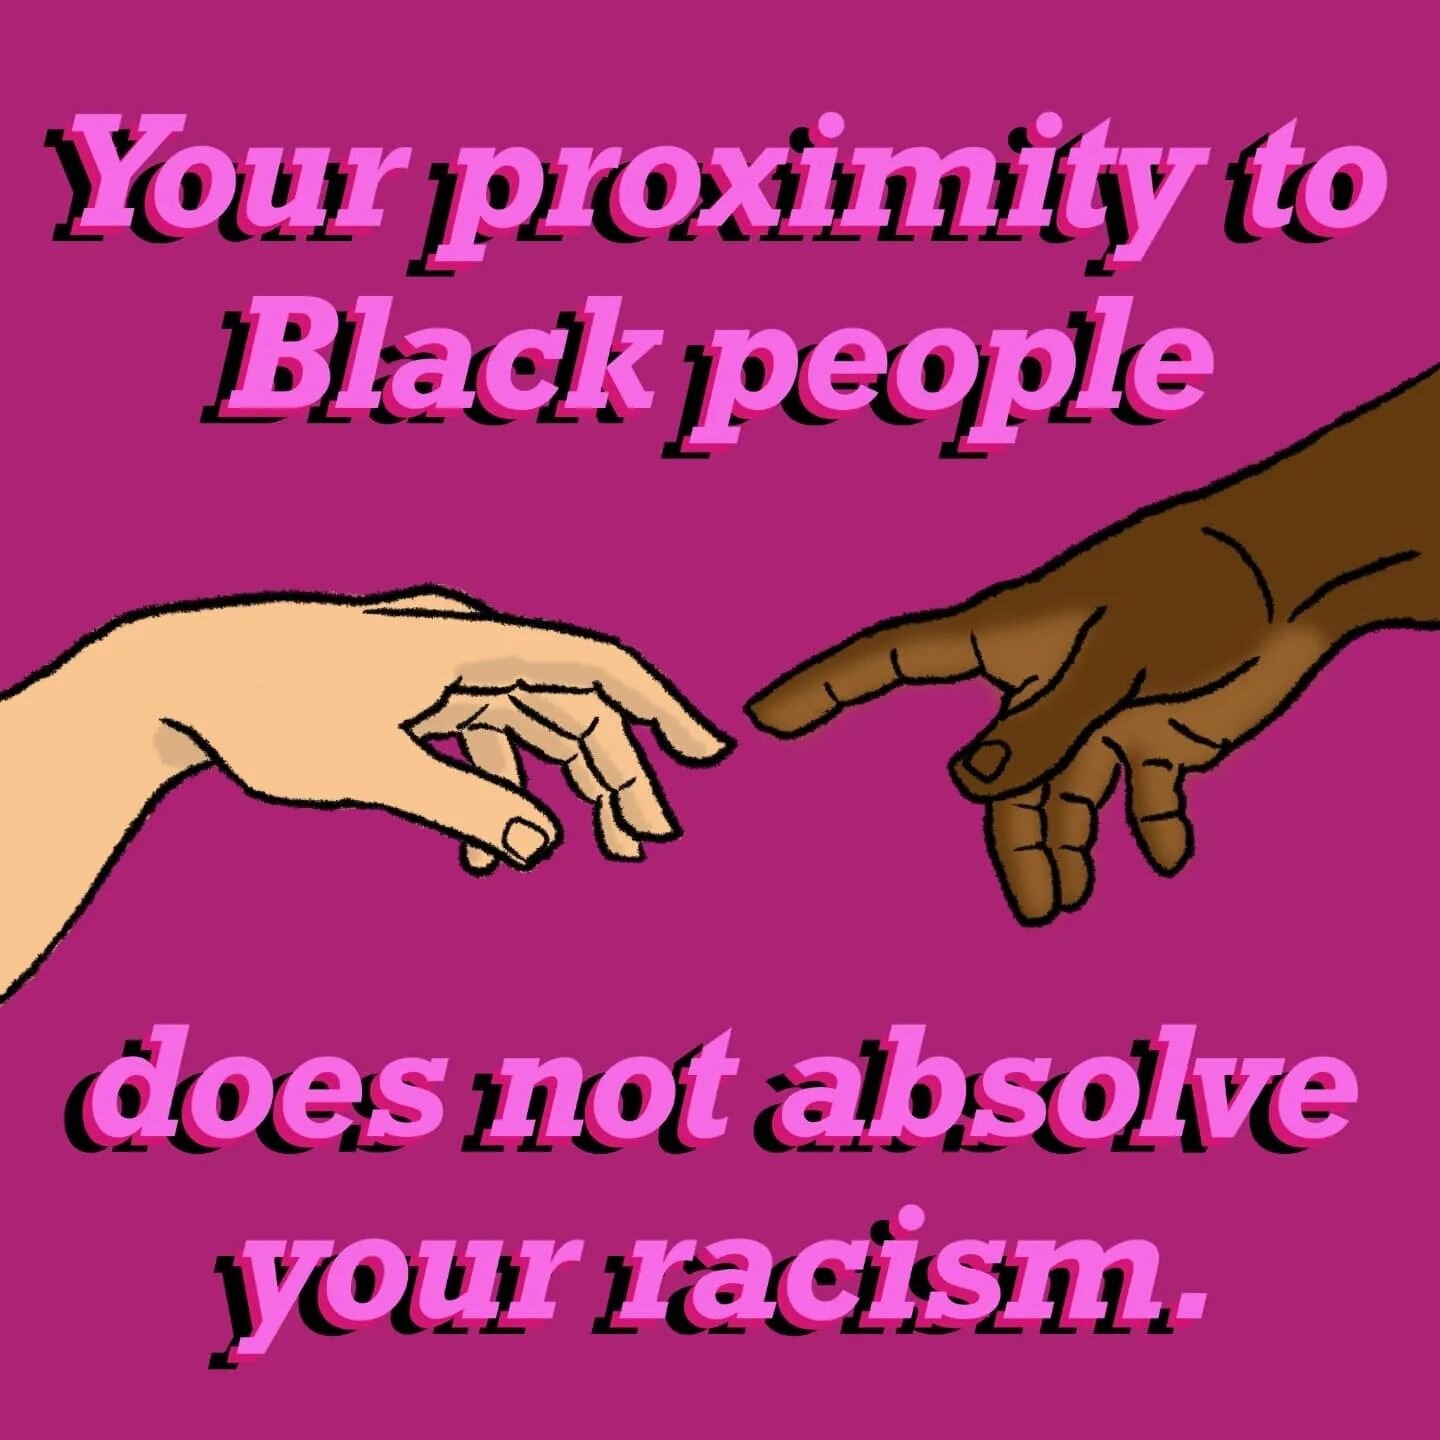 🚨Your proximity to Black people does not absolve your racism!!!!